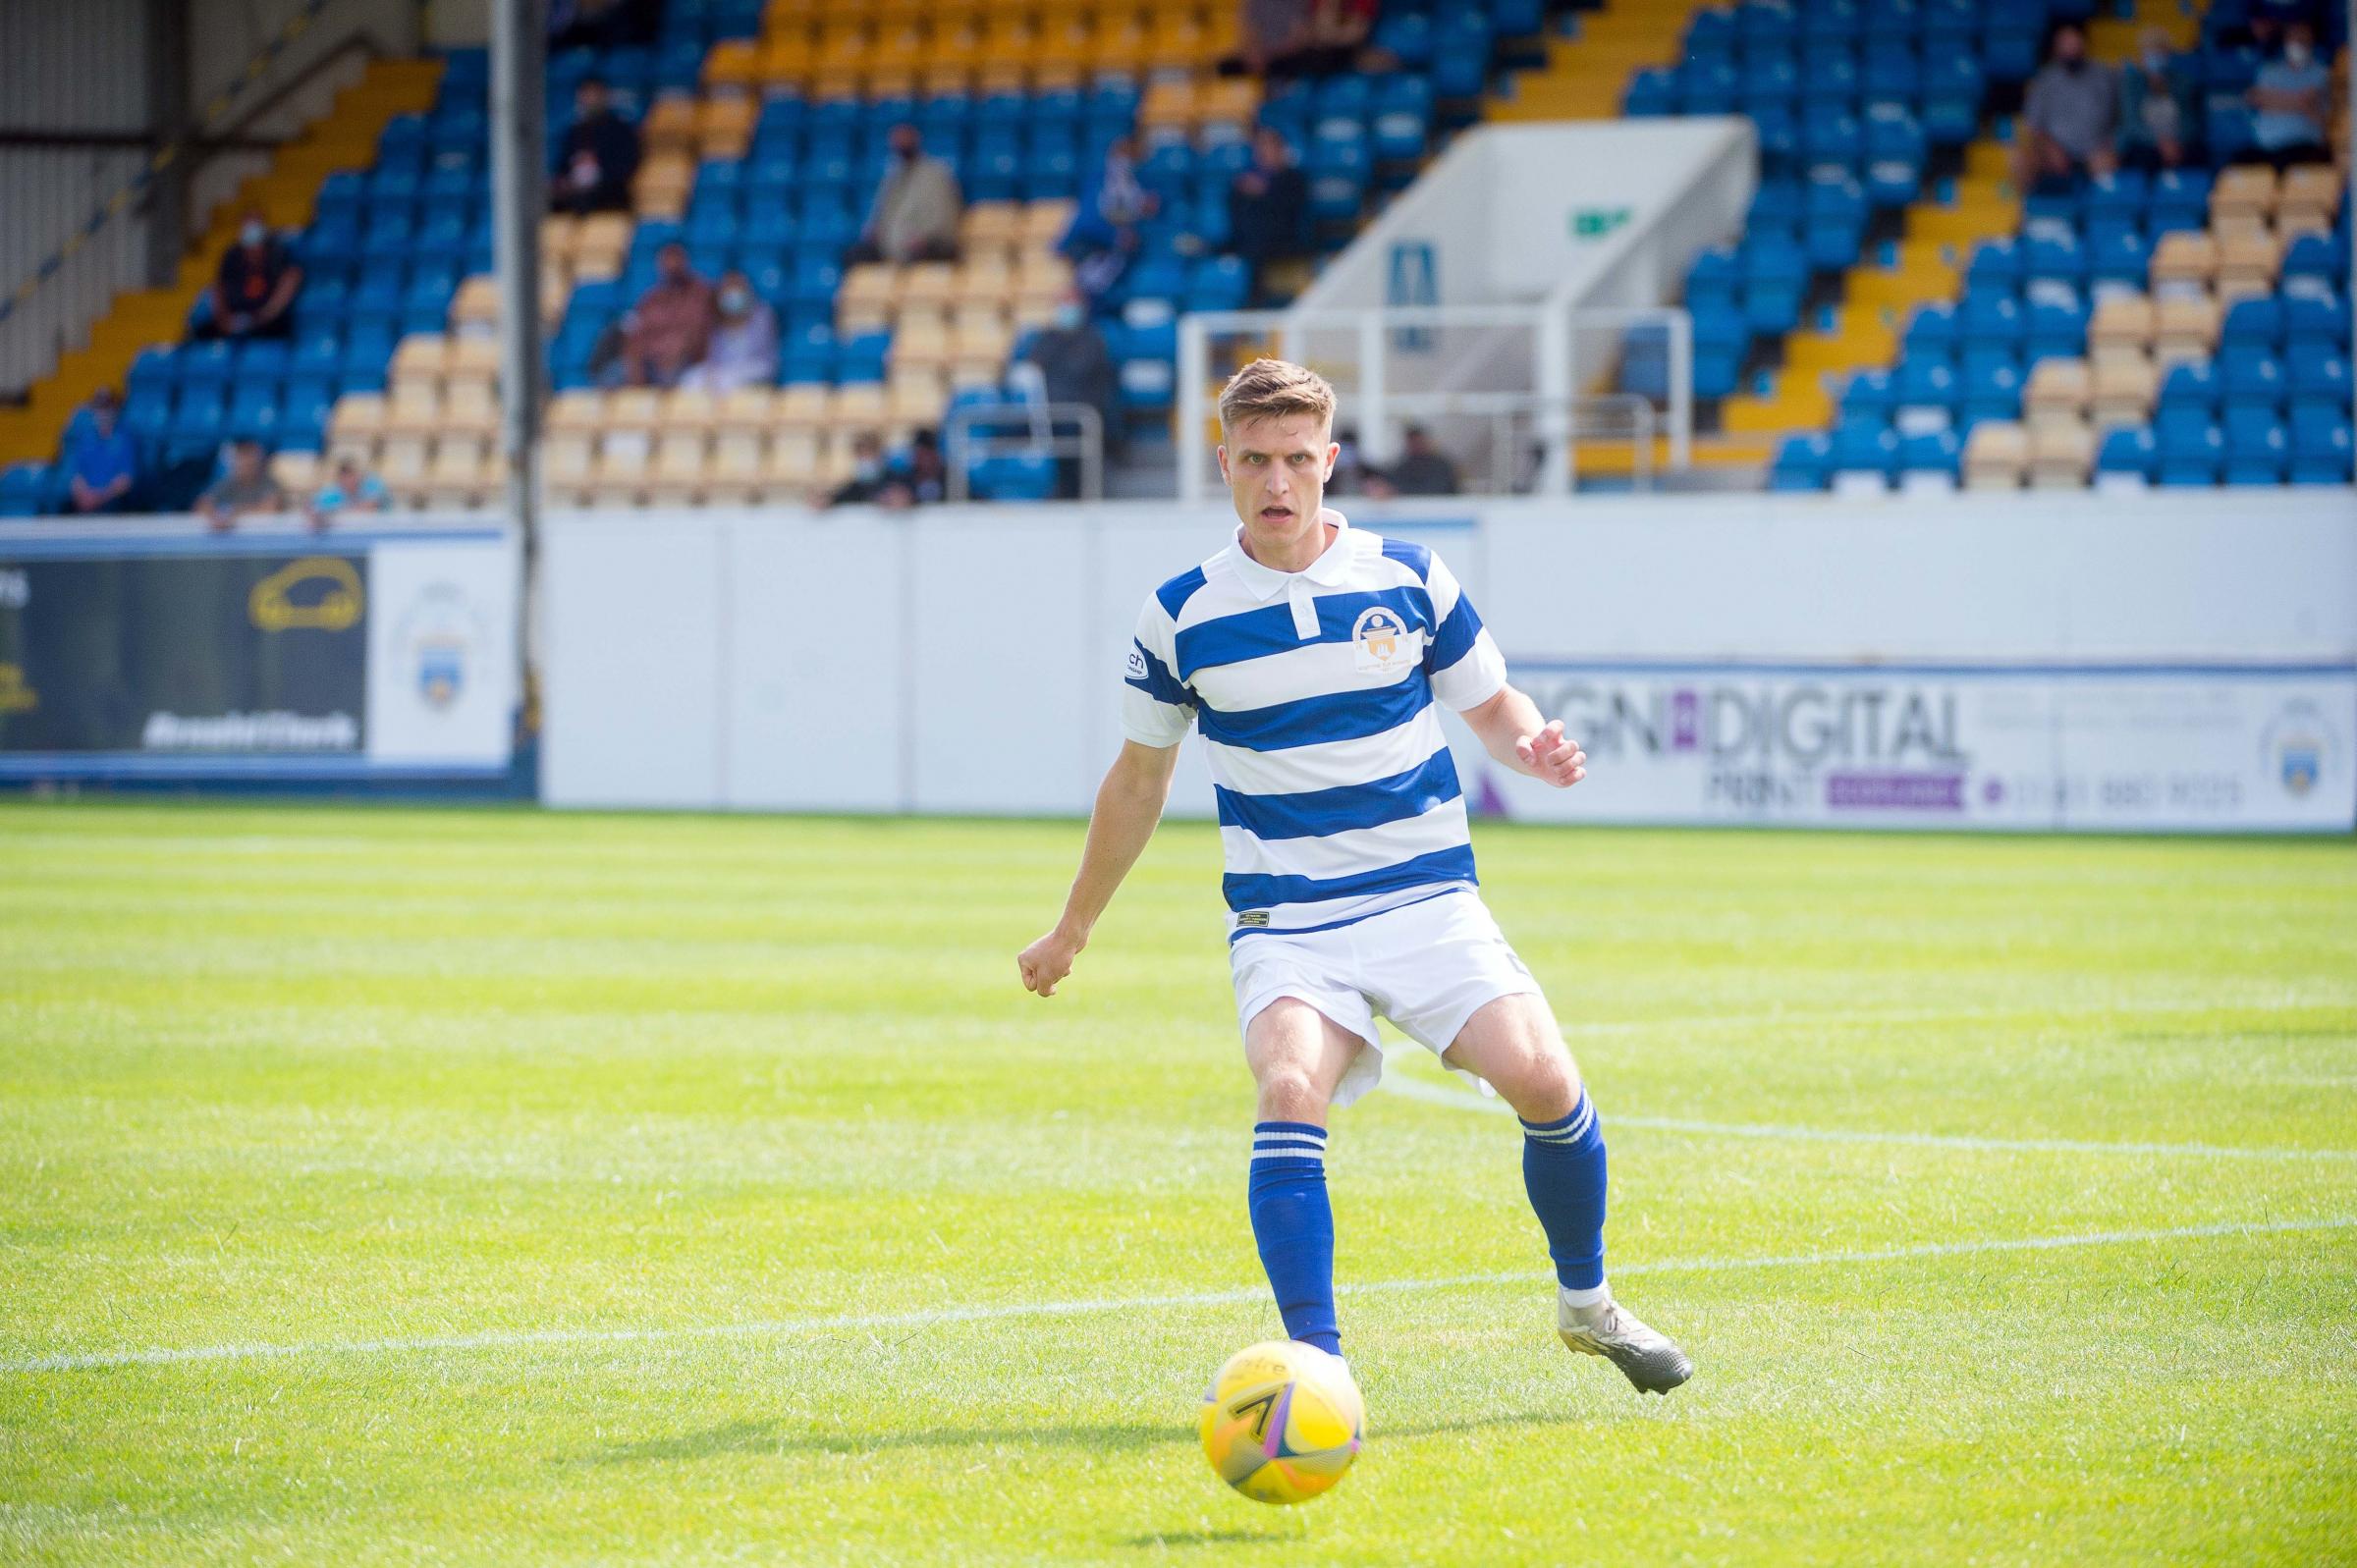 Morton's Michael Ledger ready to fill the void in defence after injury to key man